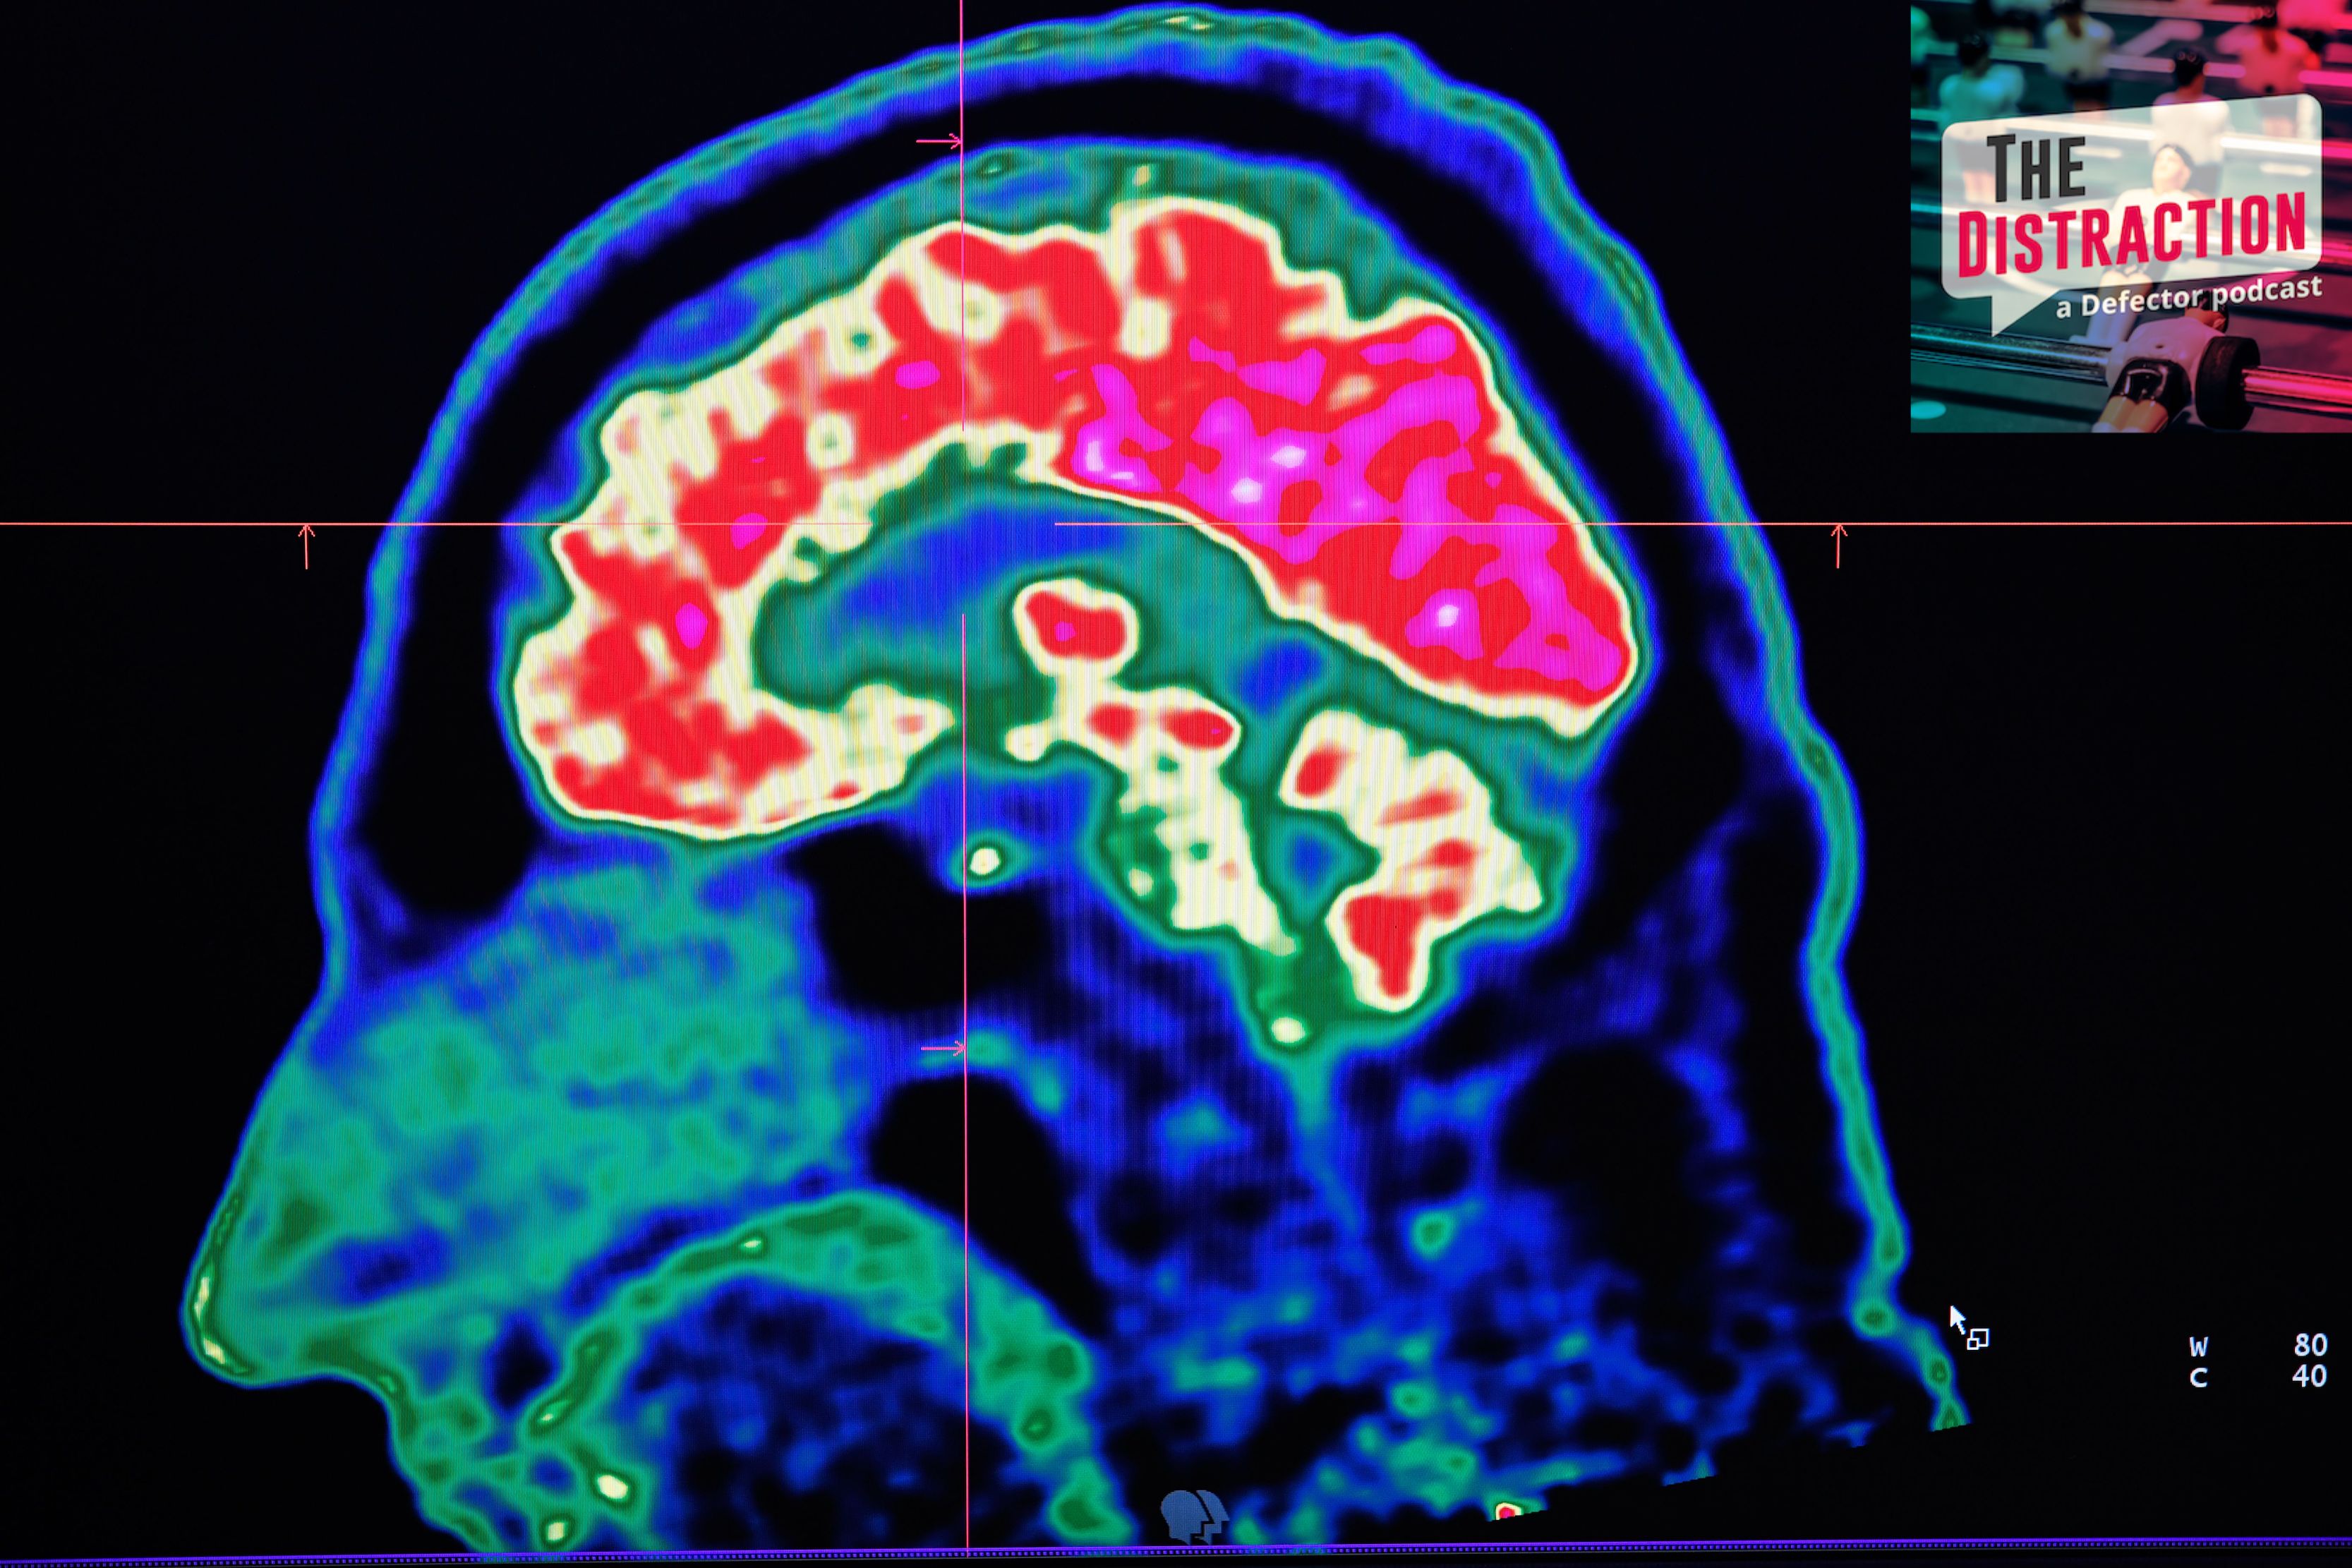 A picture of a human brain taken by a positron emission tomography scanner.